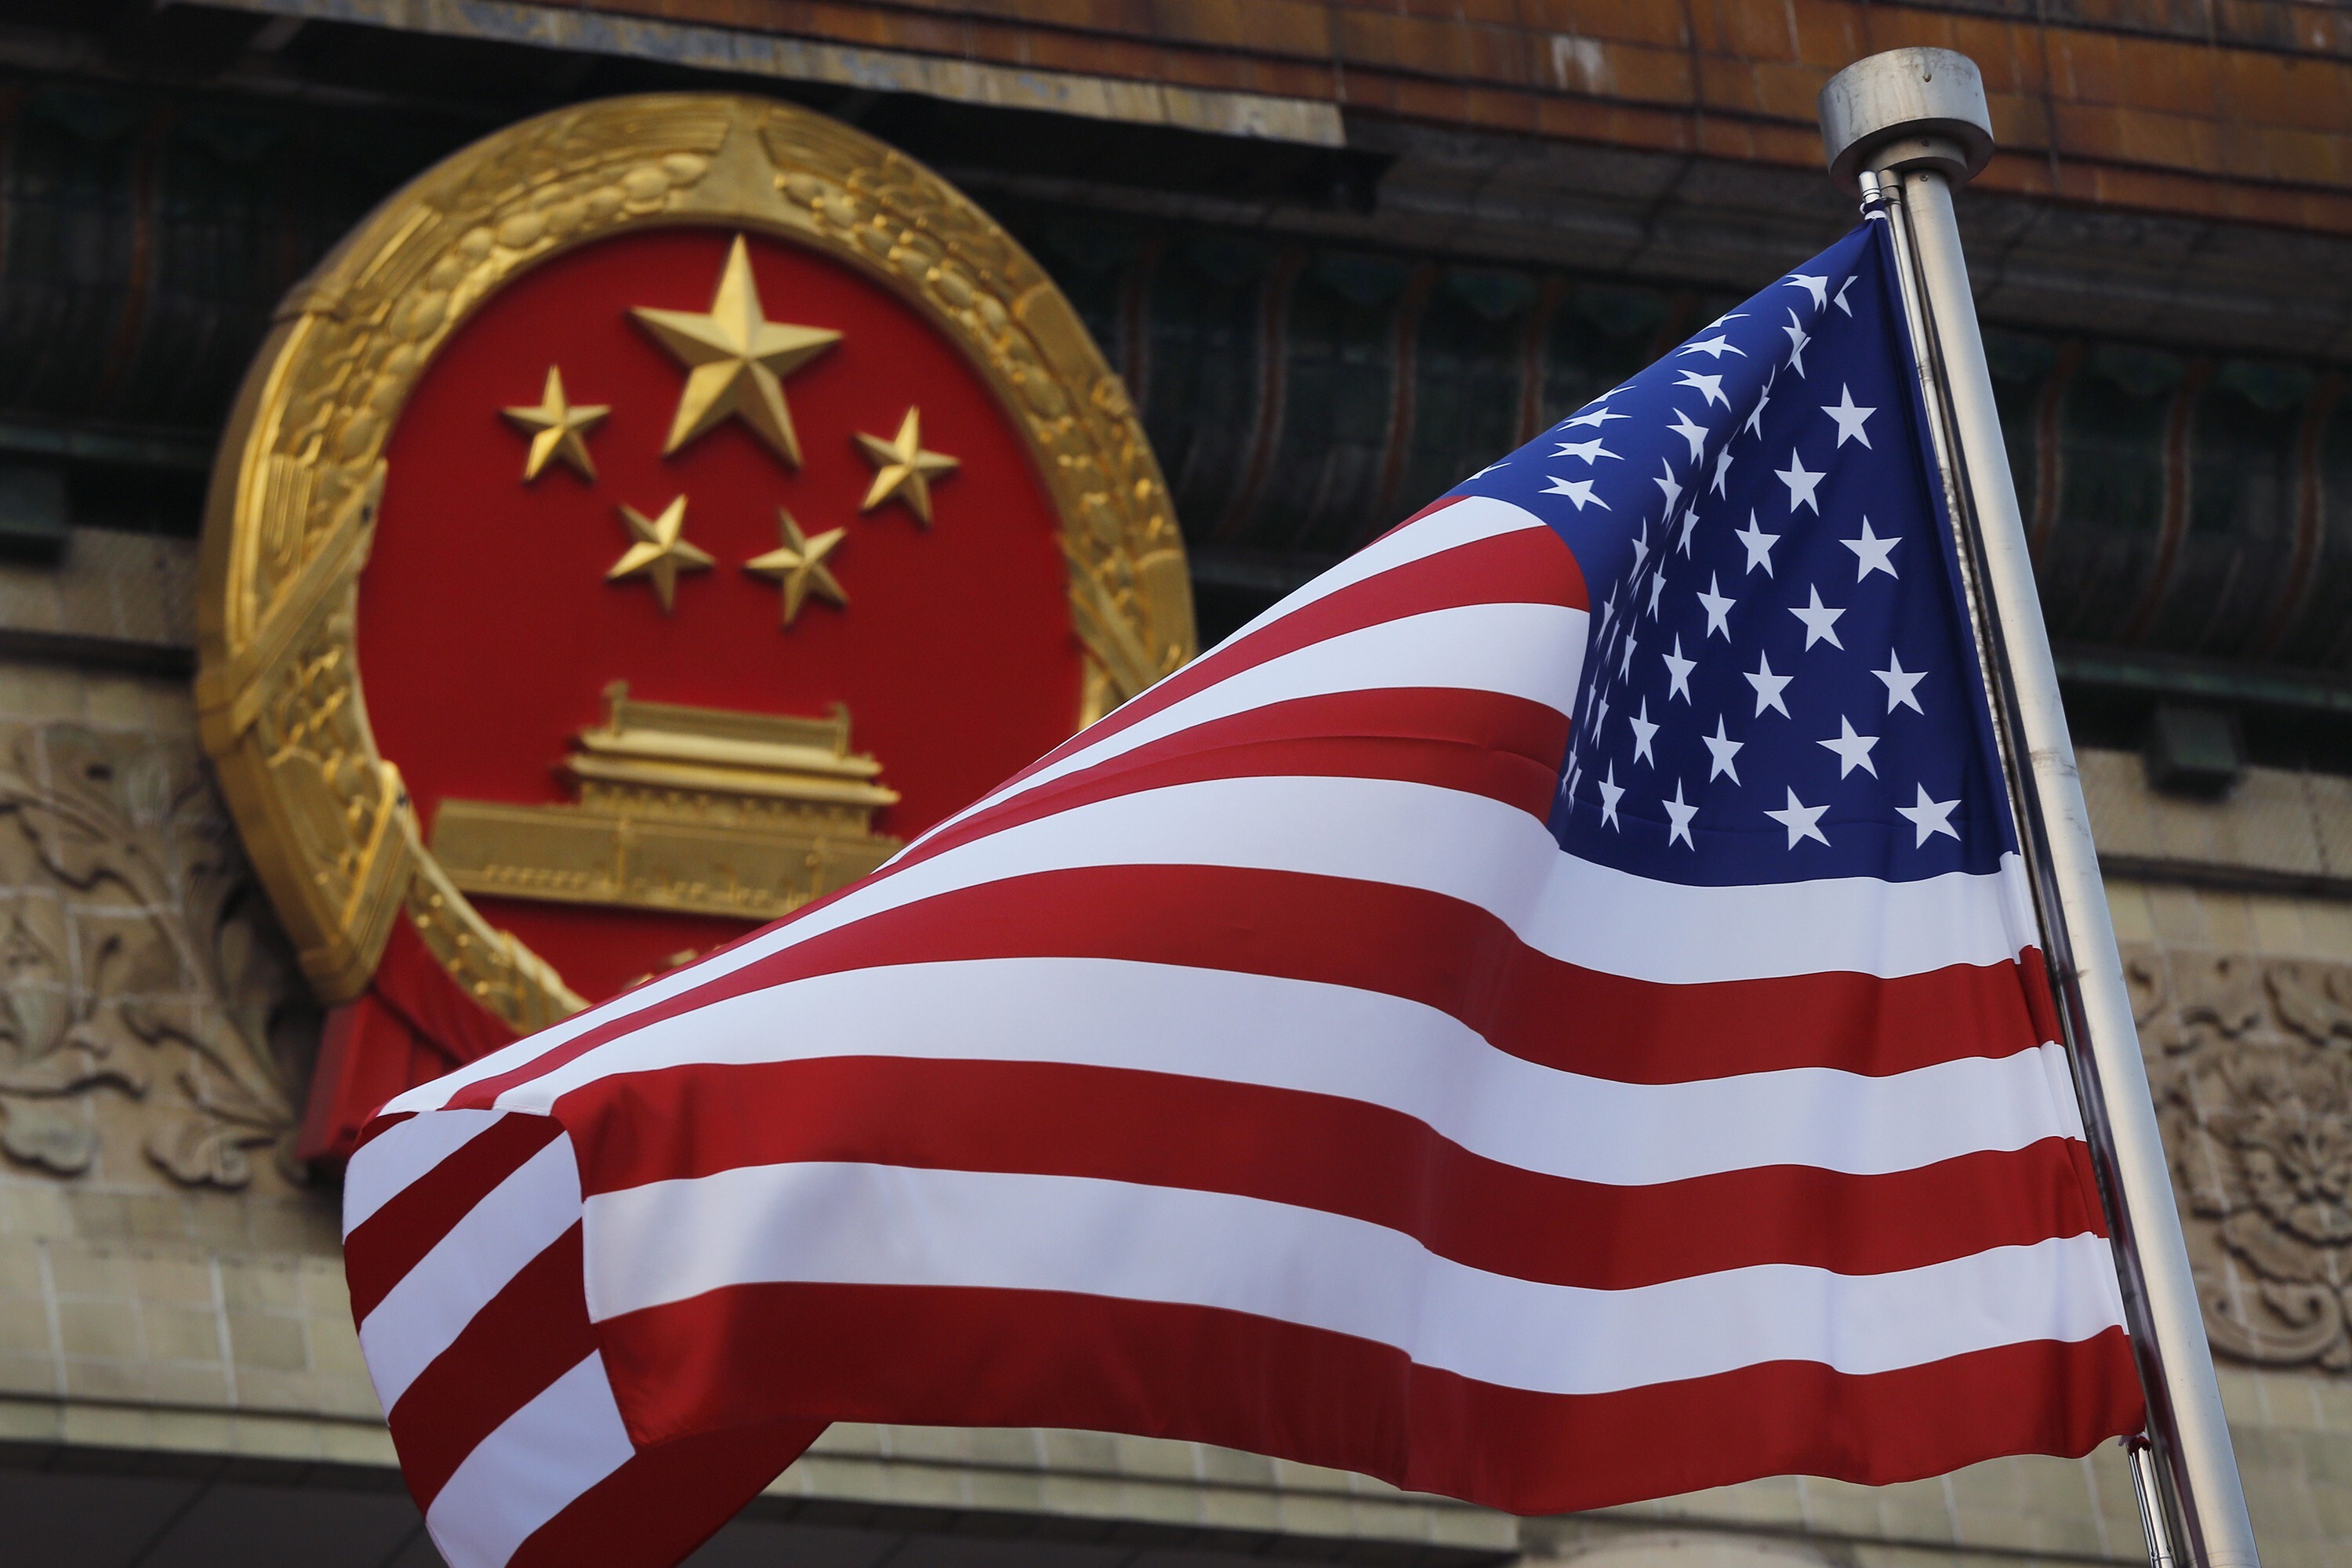 Economics and trade remain the cornerstone of China-US relations, a state media commentary has said. Photo: AP